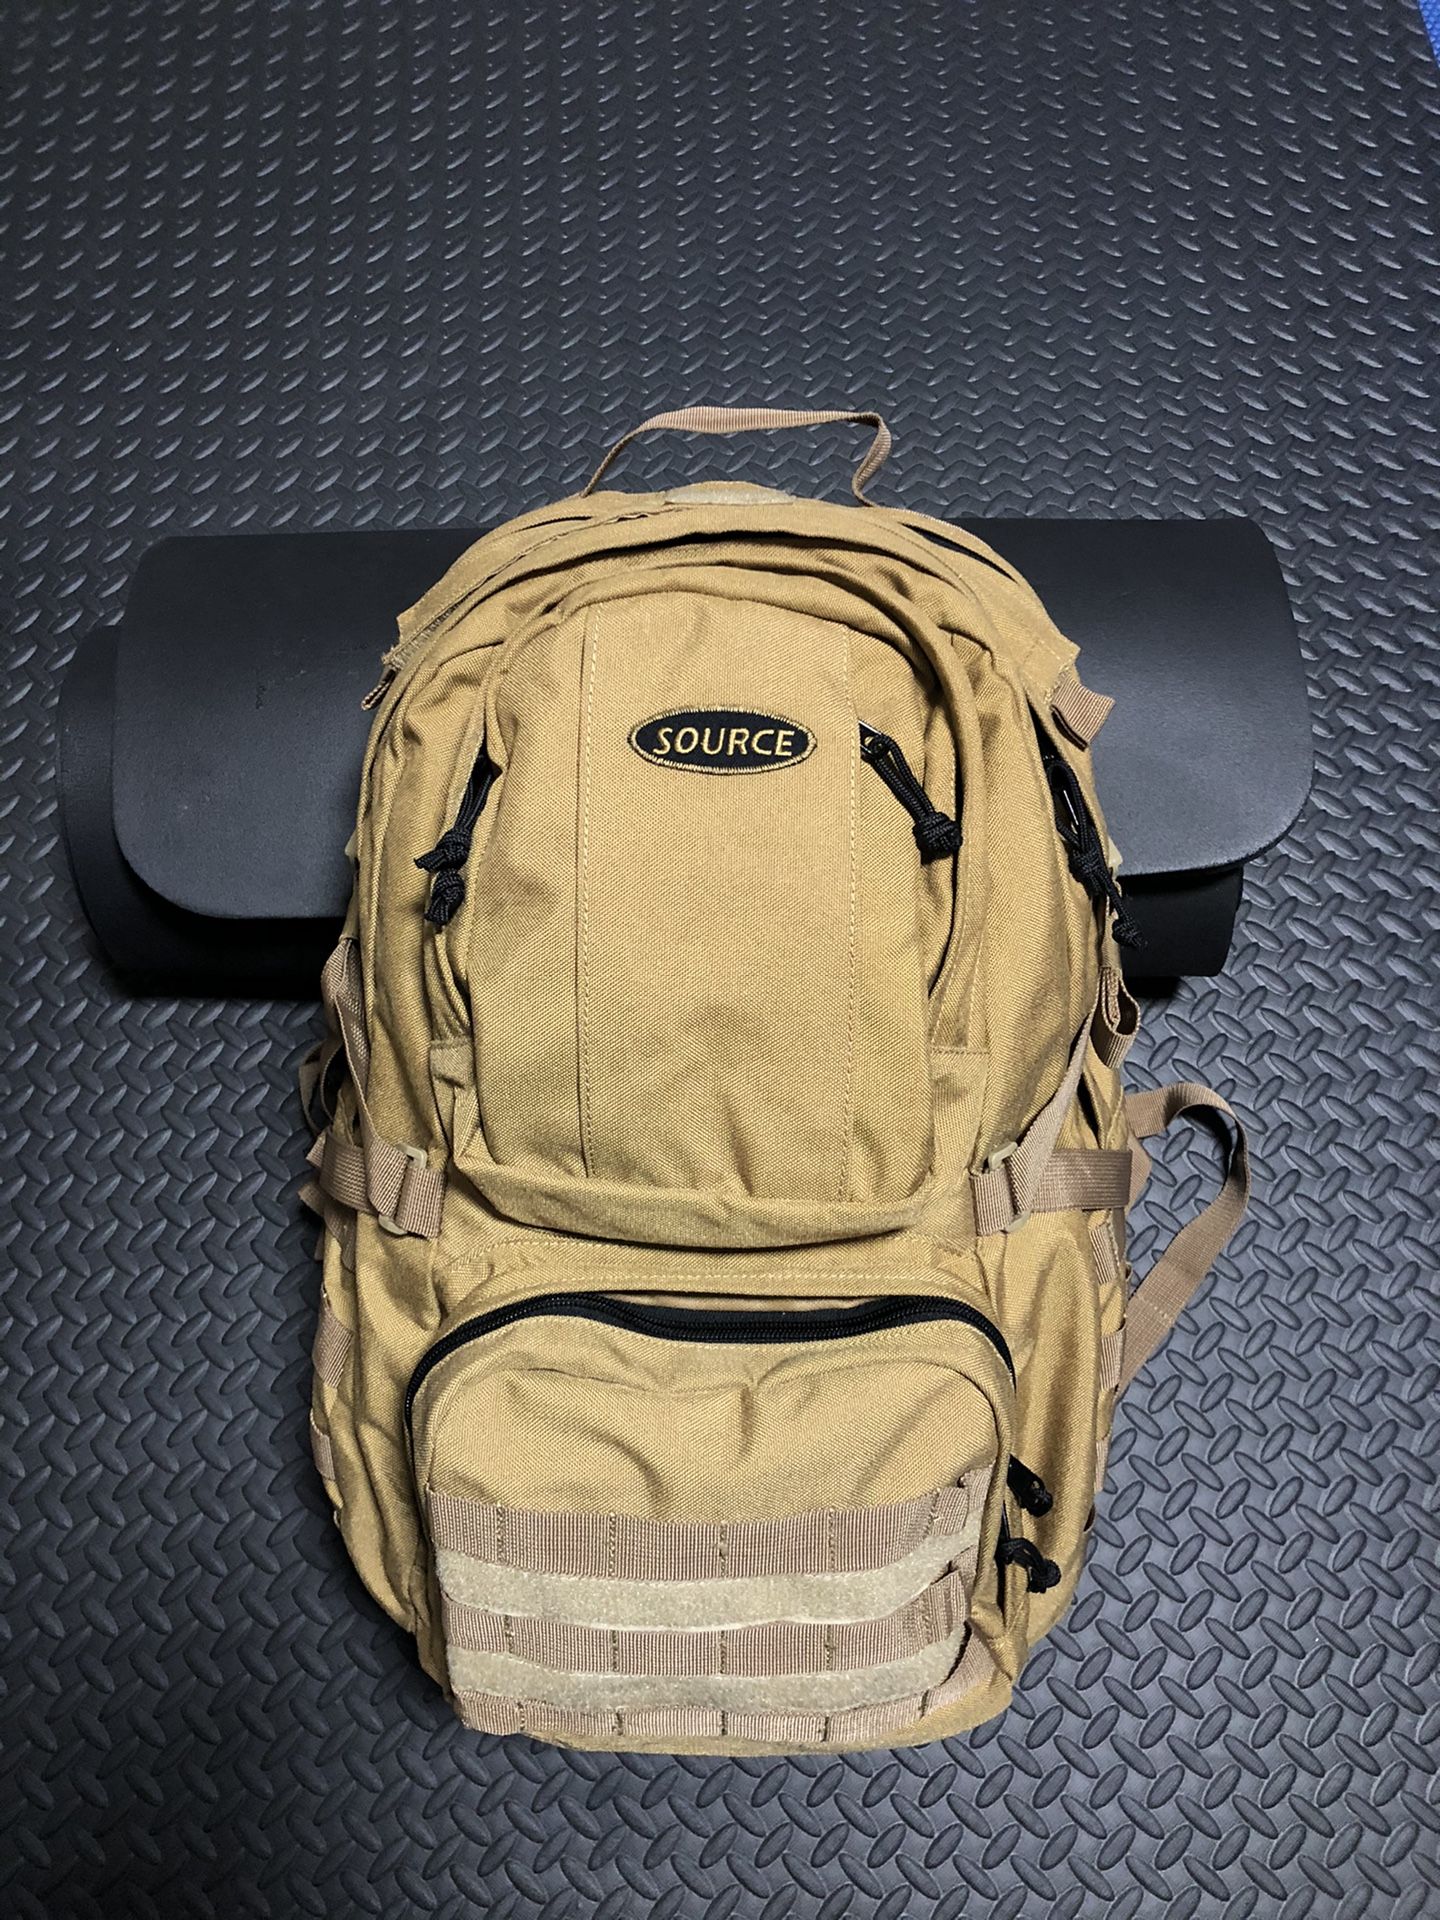 Source 3 day hydration backpack.